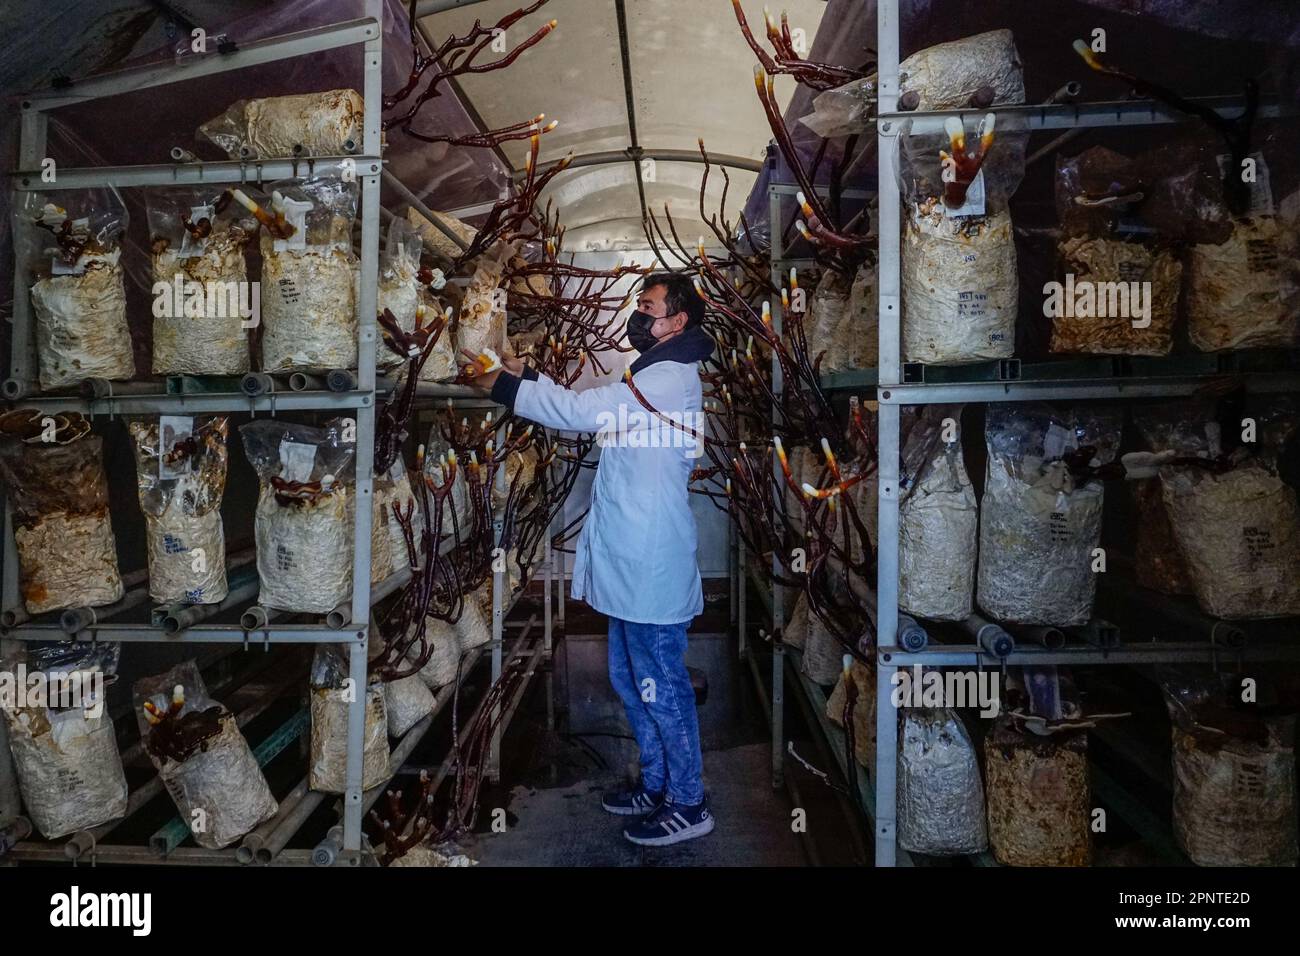 Jesús Azaid Piña López, a biologist and fellow in the Jóvenes Construyendo el Futuro (Youth Building the Future) program, checks bags of fungi at a laboratory in Puebla, Mexico on November 29, 2021. Mushrooms are isolated in a special environment to promote the growth of protected strains. (Patricia Zavala Gutiérrez/Global Press Journal) Stock Photo